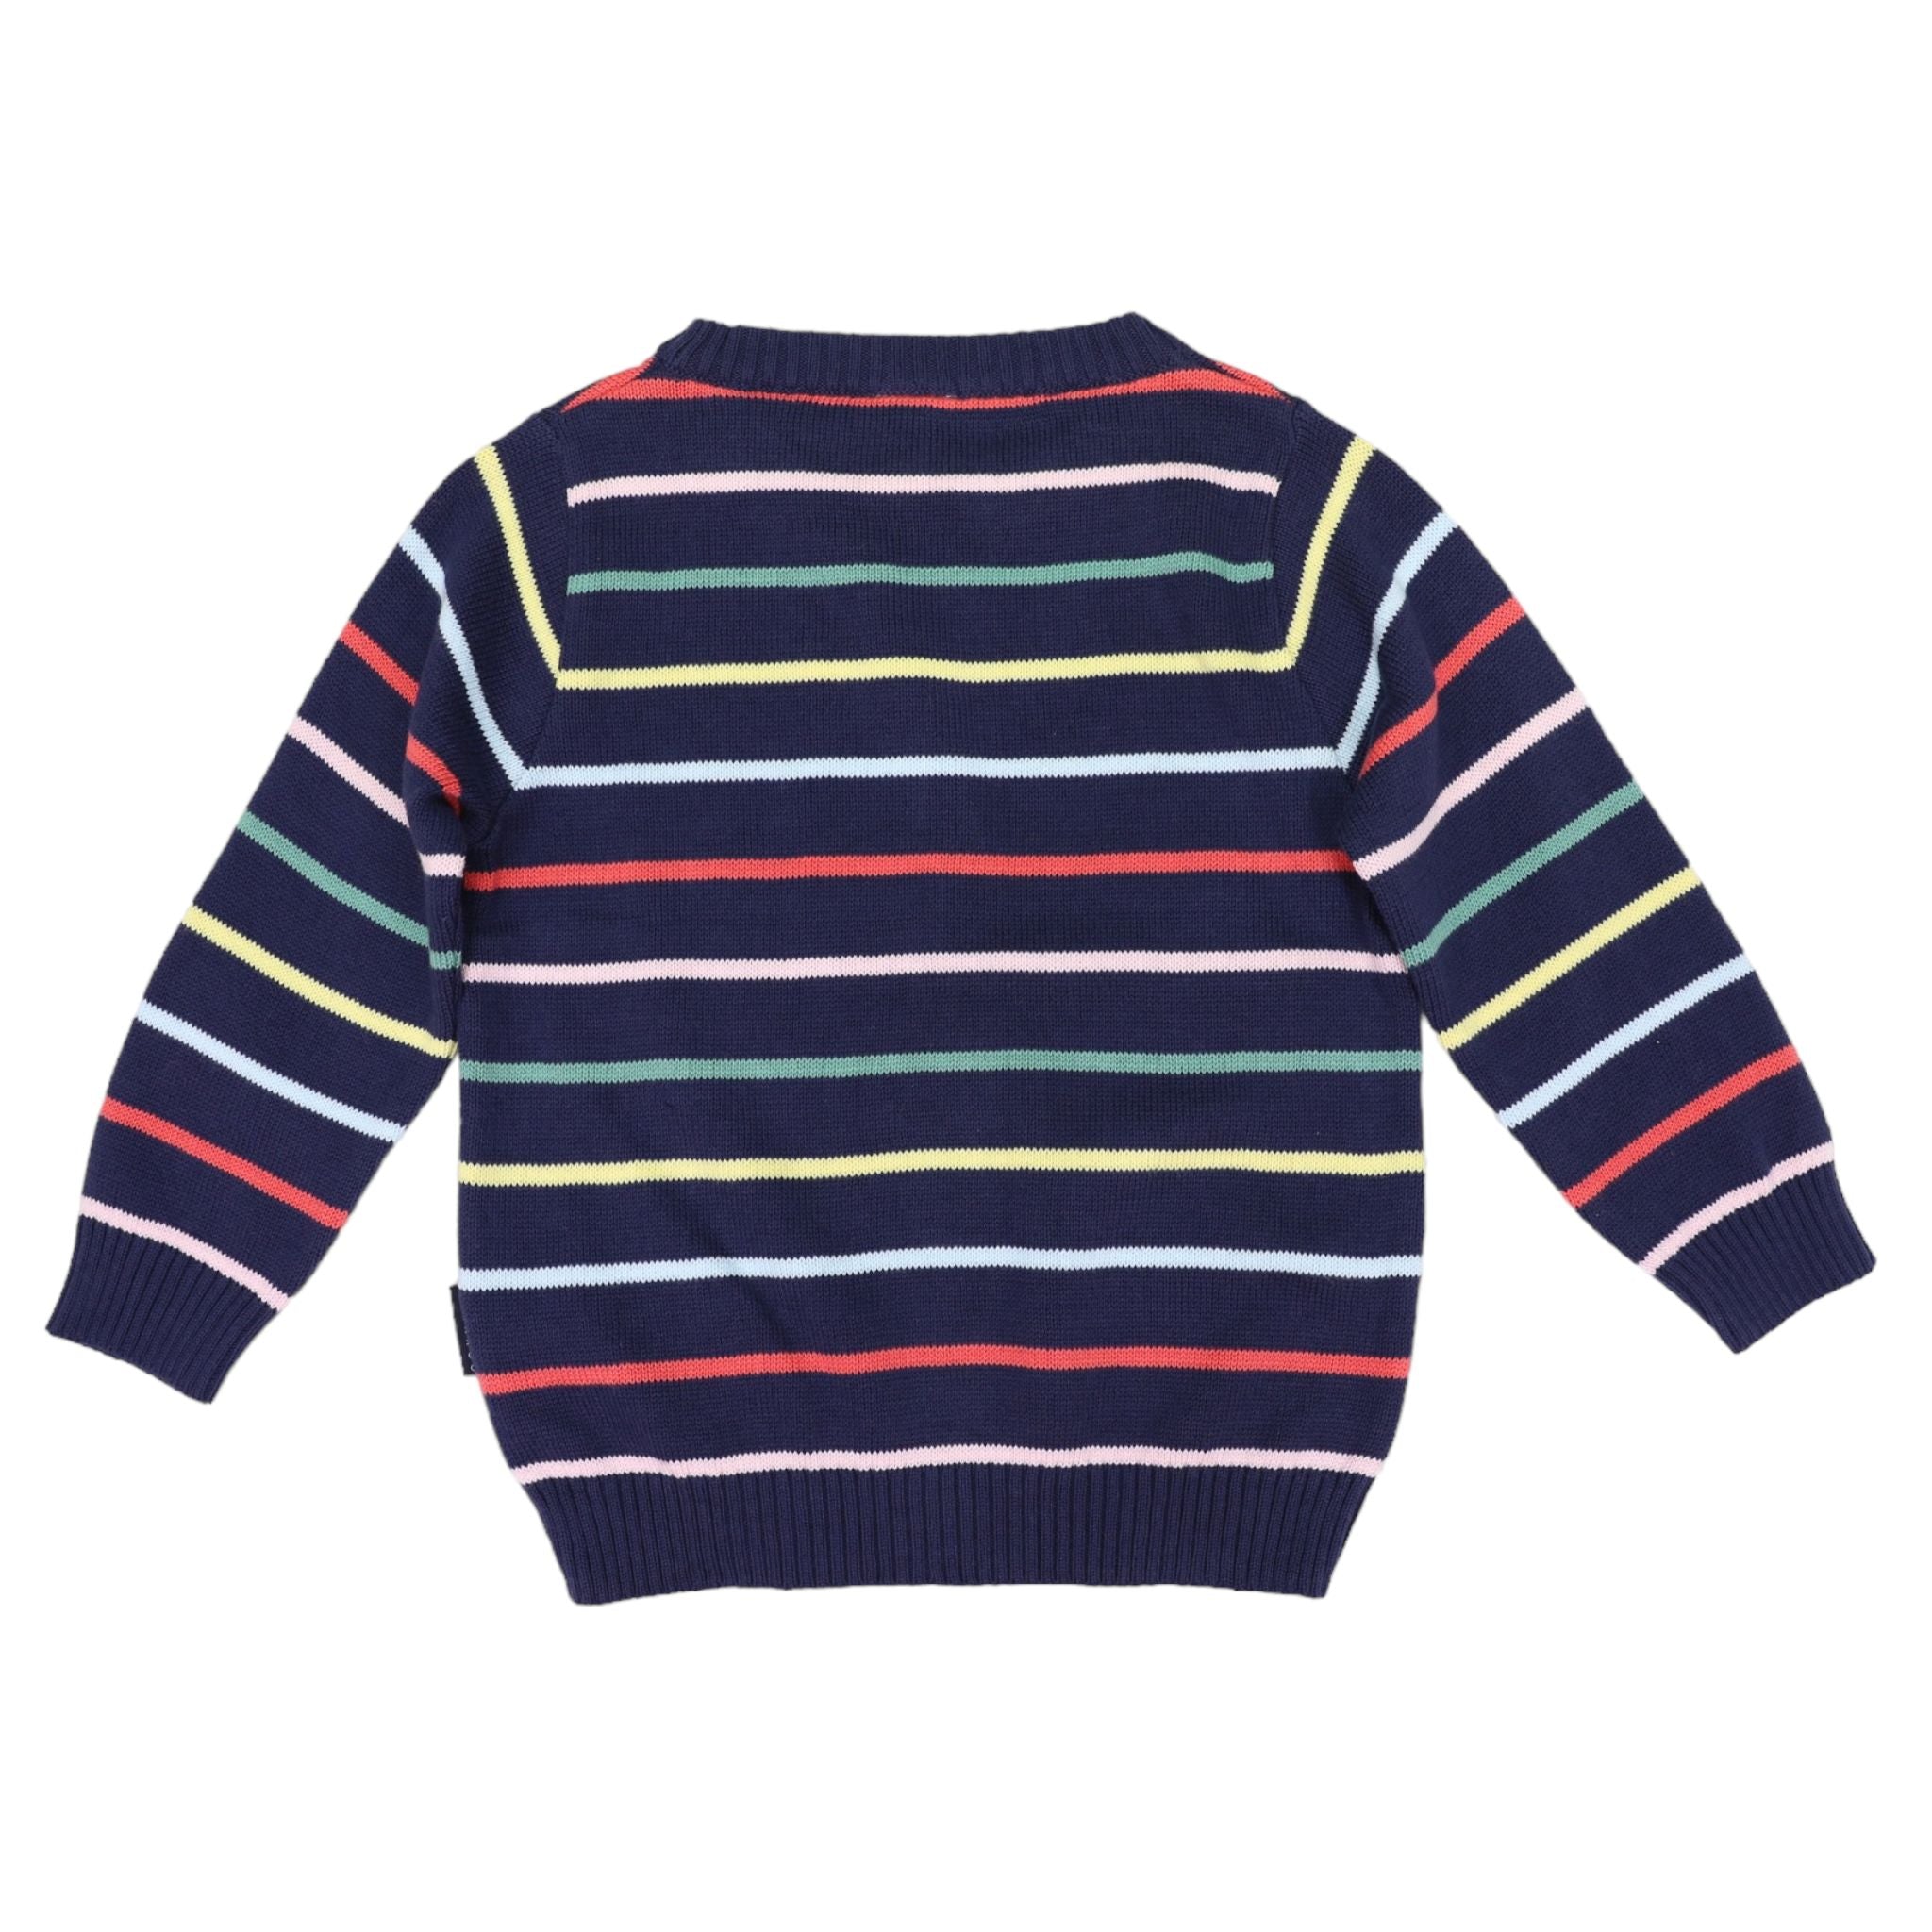 Knit Striped Sweater-Navy/Pink